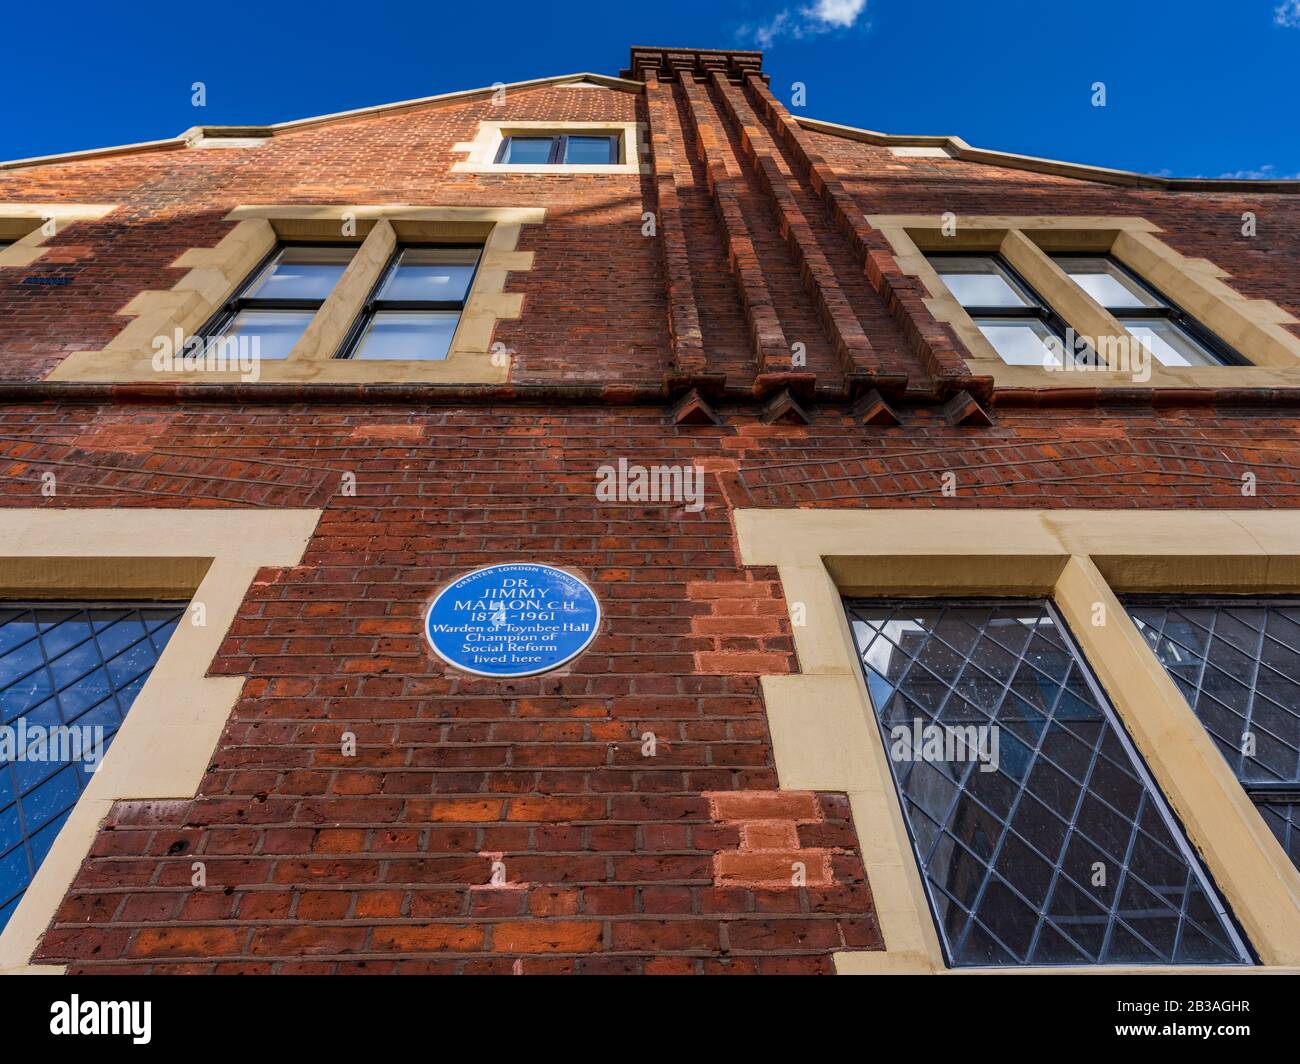 Dr Jimmy Mallon Blue Plaque Toynbee Hall London. Dr Jimmy Mallon C.H. 1874-1961, champion of Social Reform and Warden of Toynbee Hall 1919-1954. Stock Photo